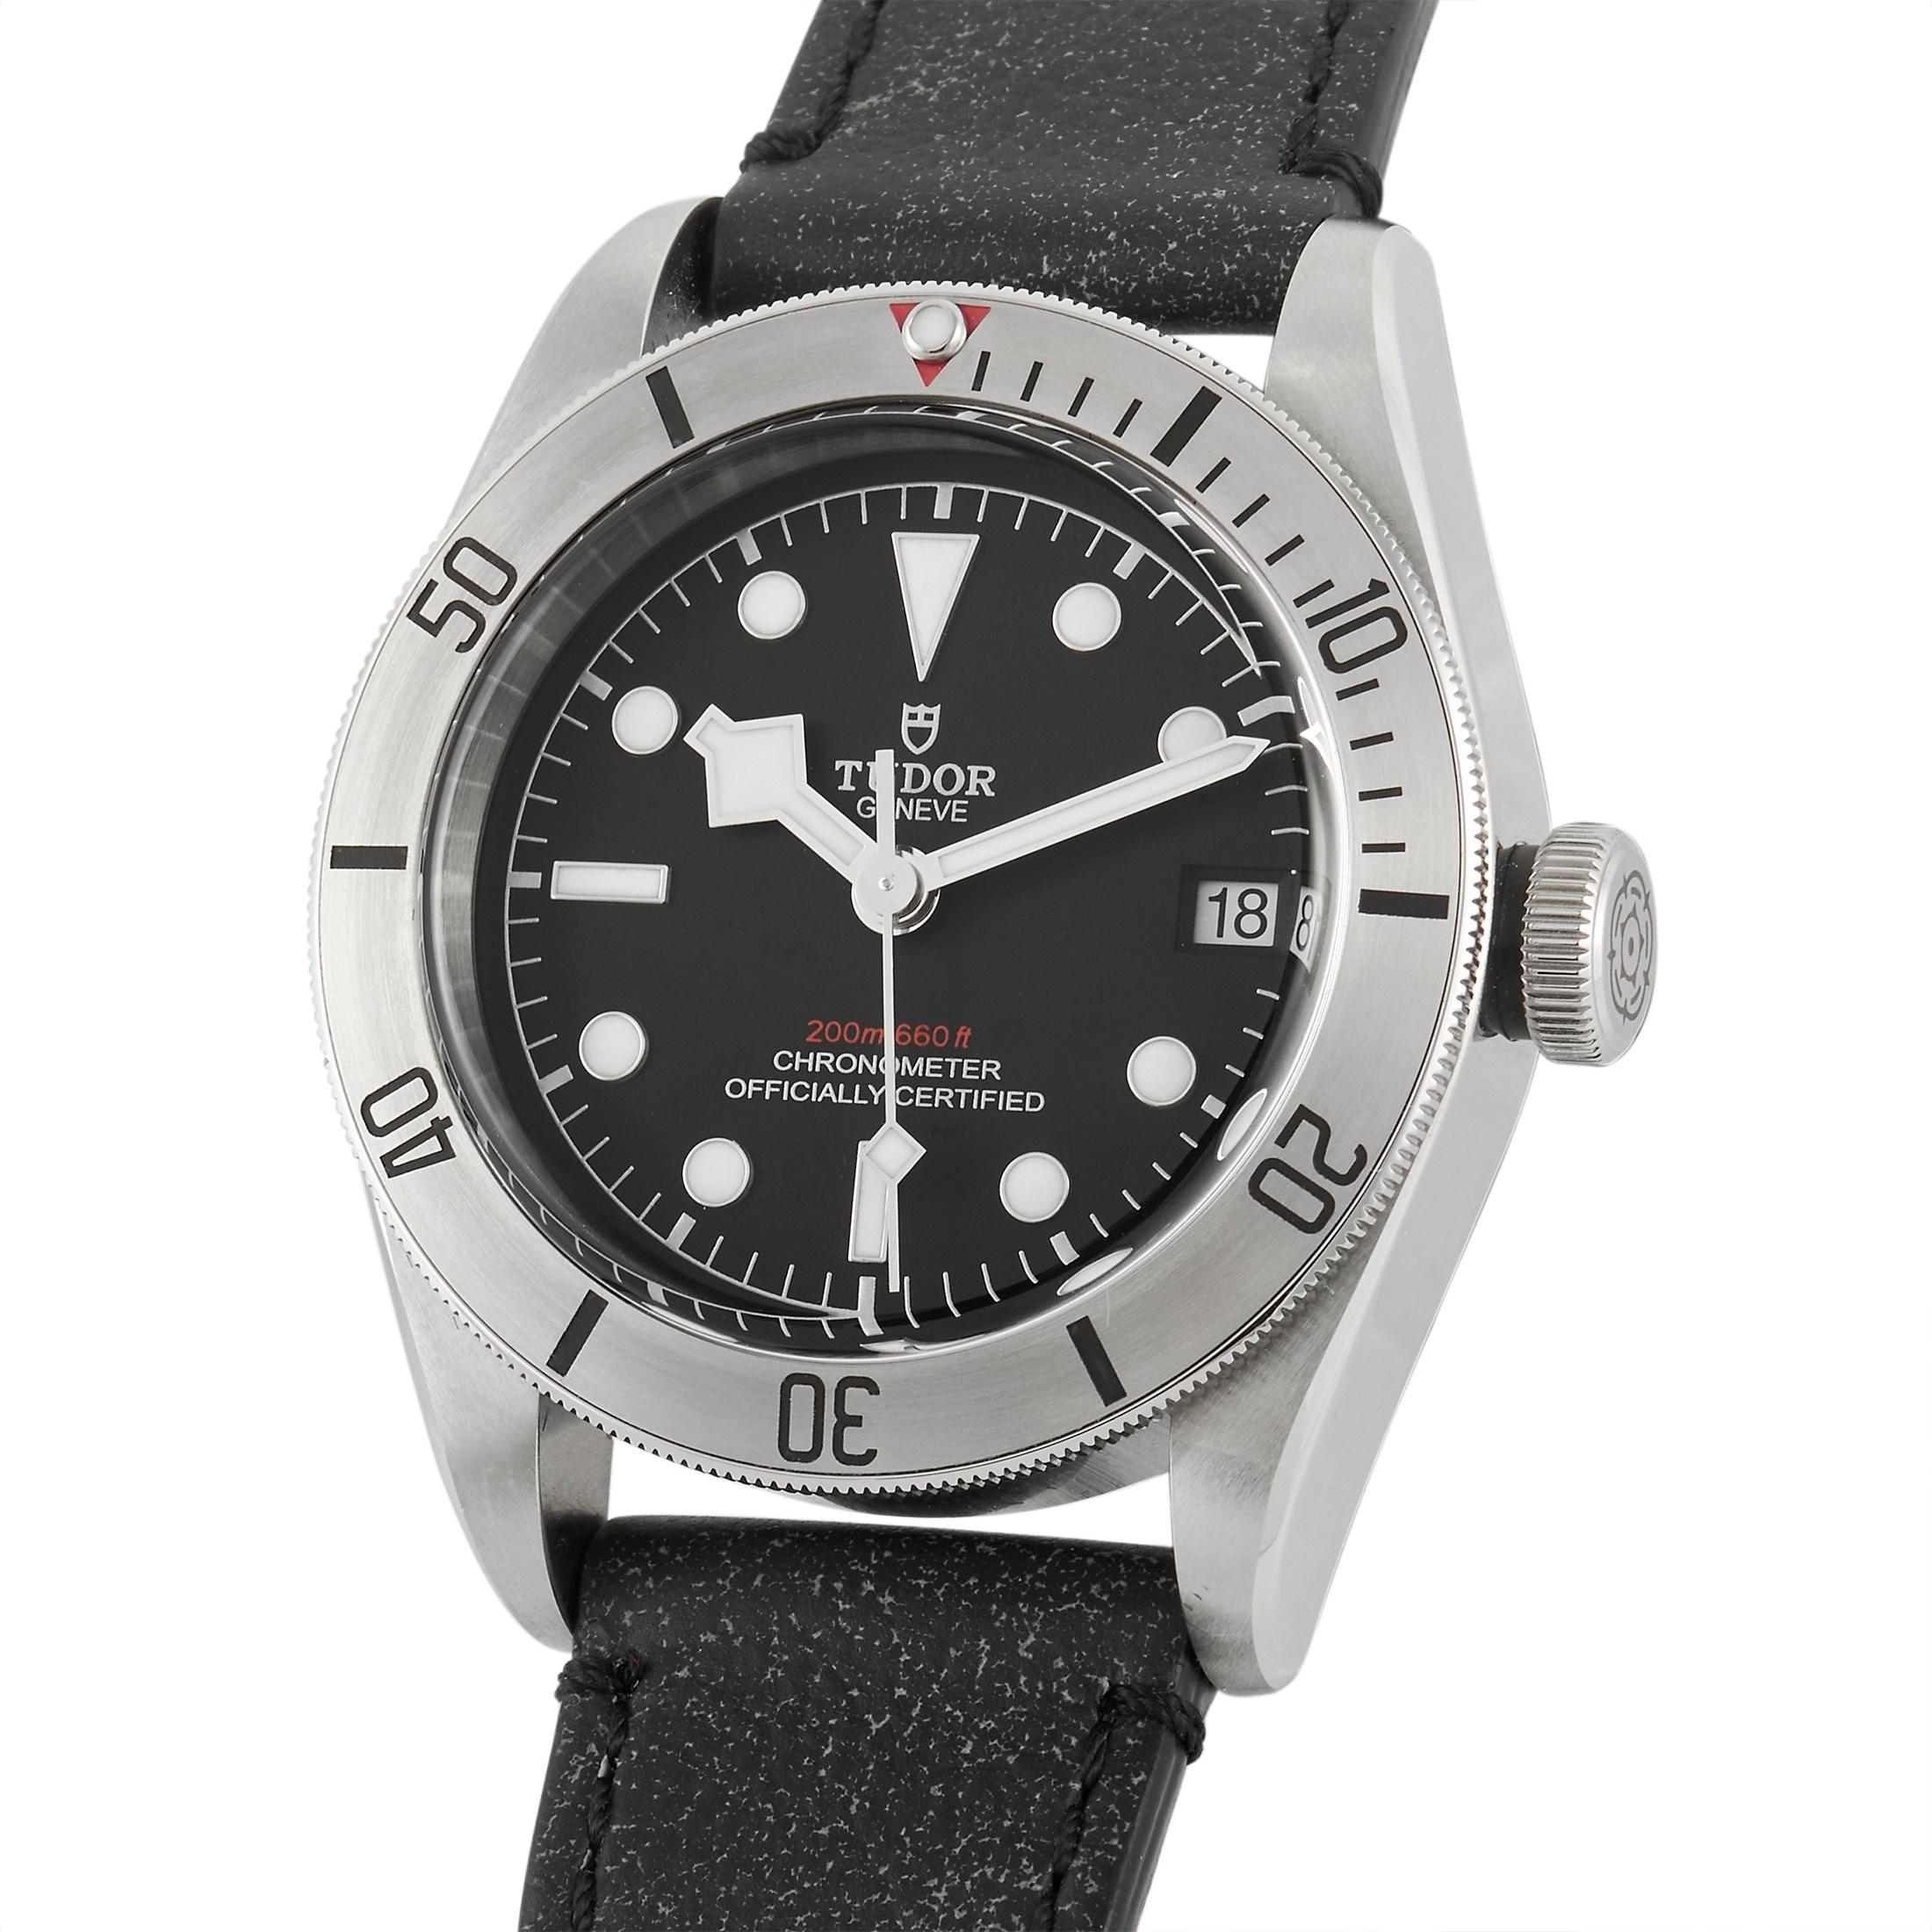 The Tudor Heritage Black Bay Watch, reference number 79730, is a sleek simple style that is ready to accompany you anywhere. 

The beauty of this minimalist design begins with its 41mm round stainless steel case. Black minute markings accent the